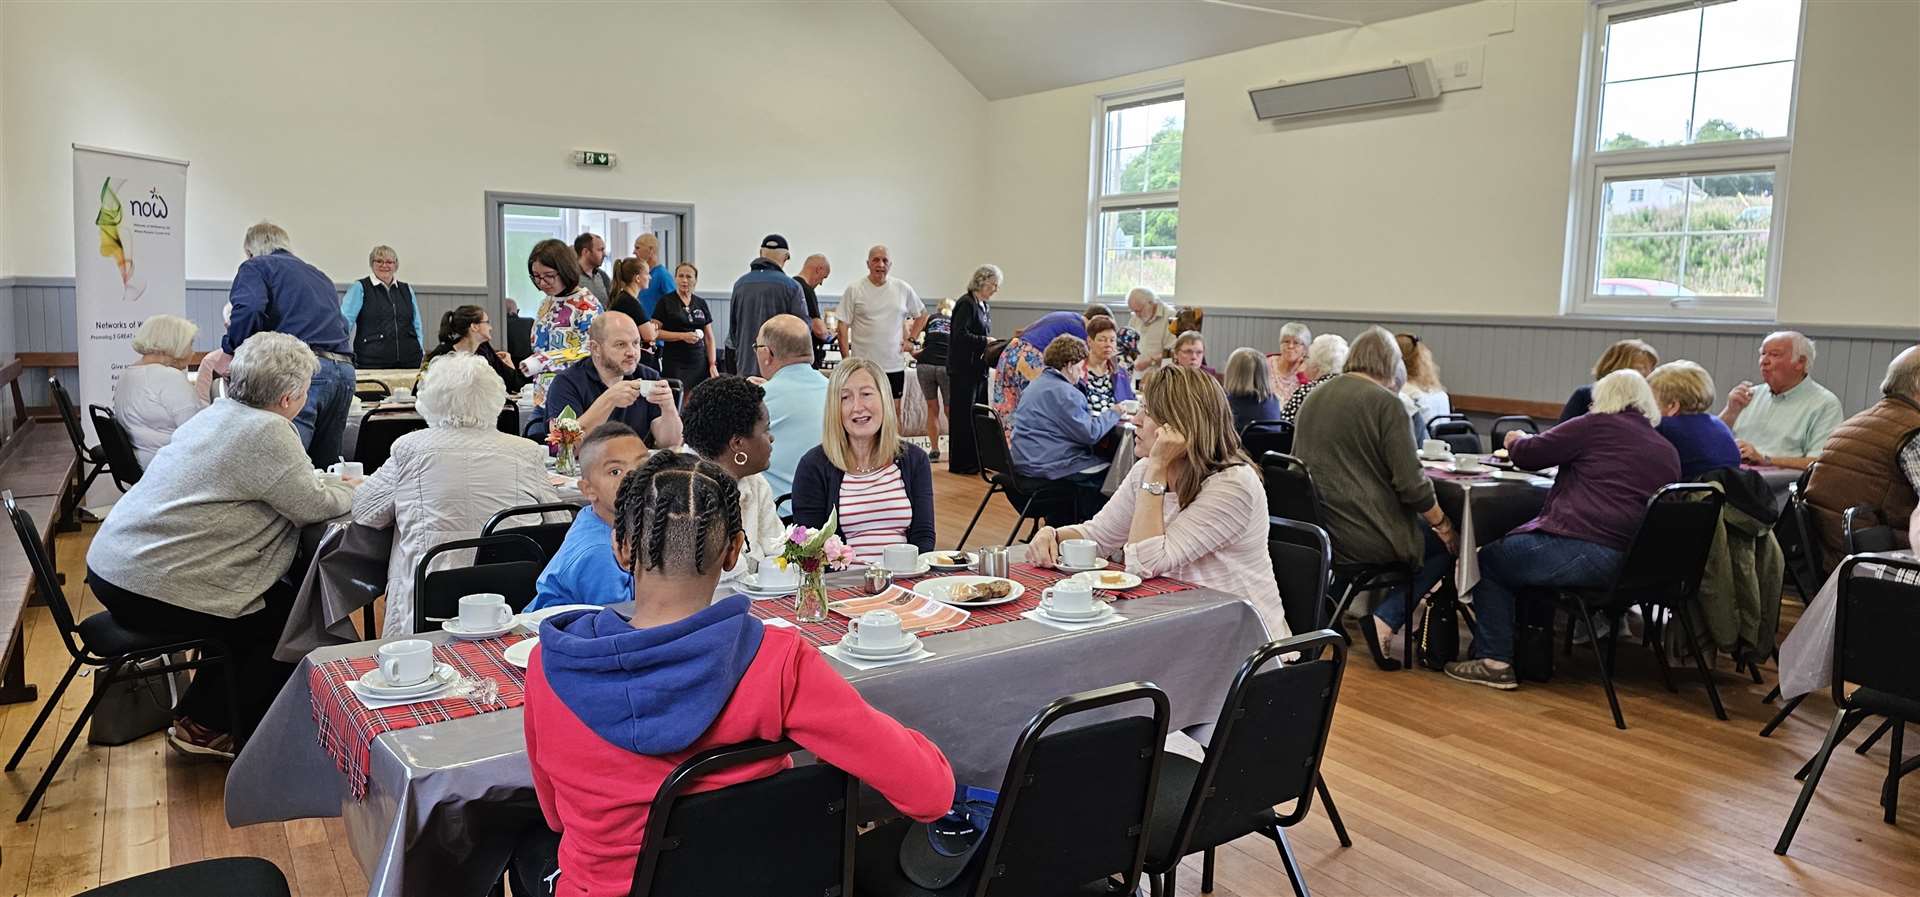 A lively Gartly Community Hall during Coffee for a Cause.